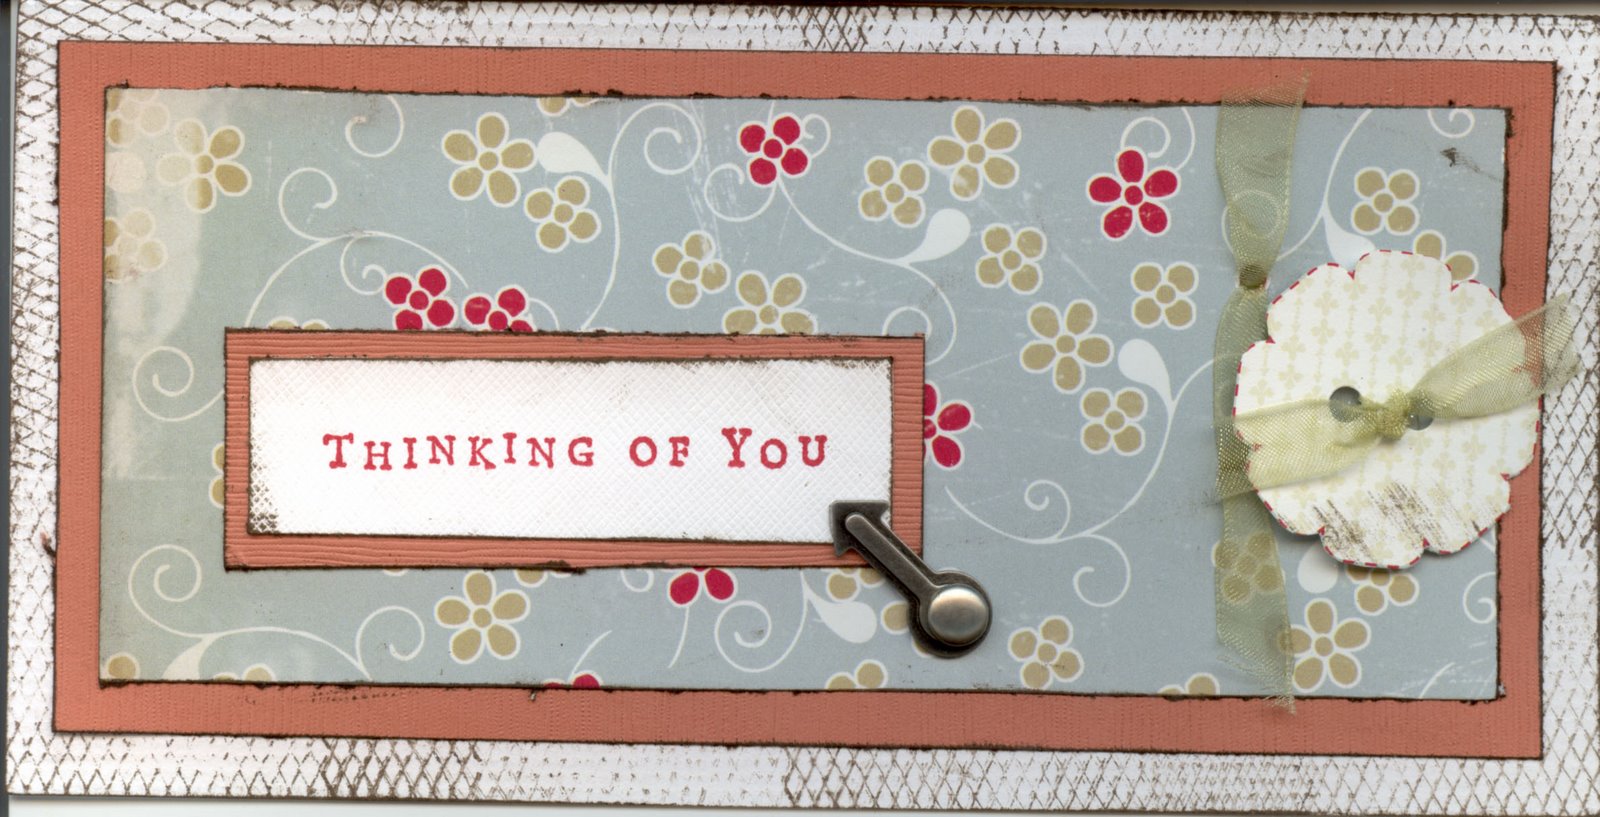 [Thinking+or+you+card.jpg]